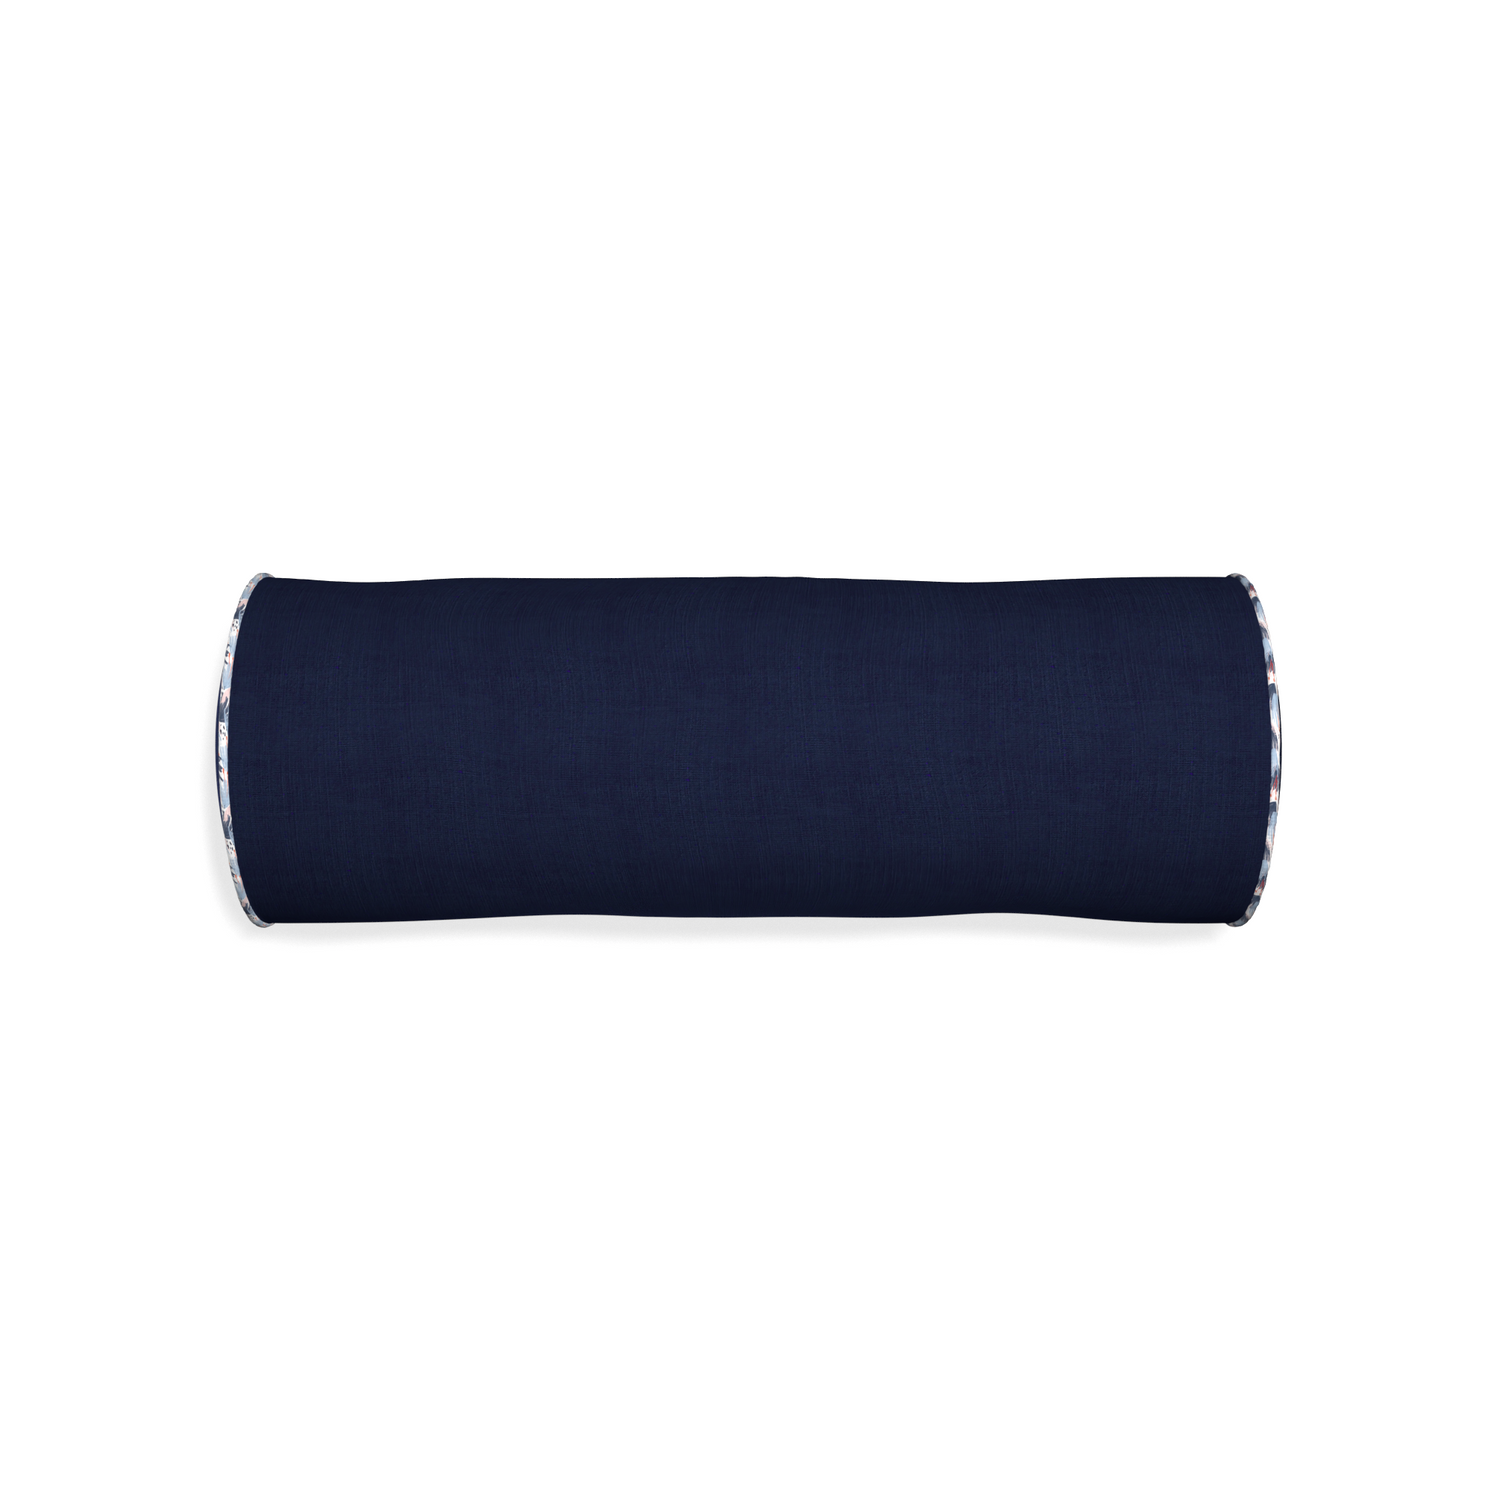 Bolster midnight custom navy bluepillow with e piping on white background